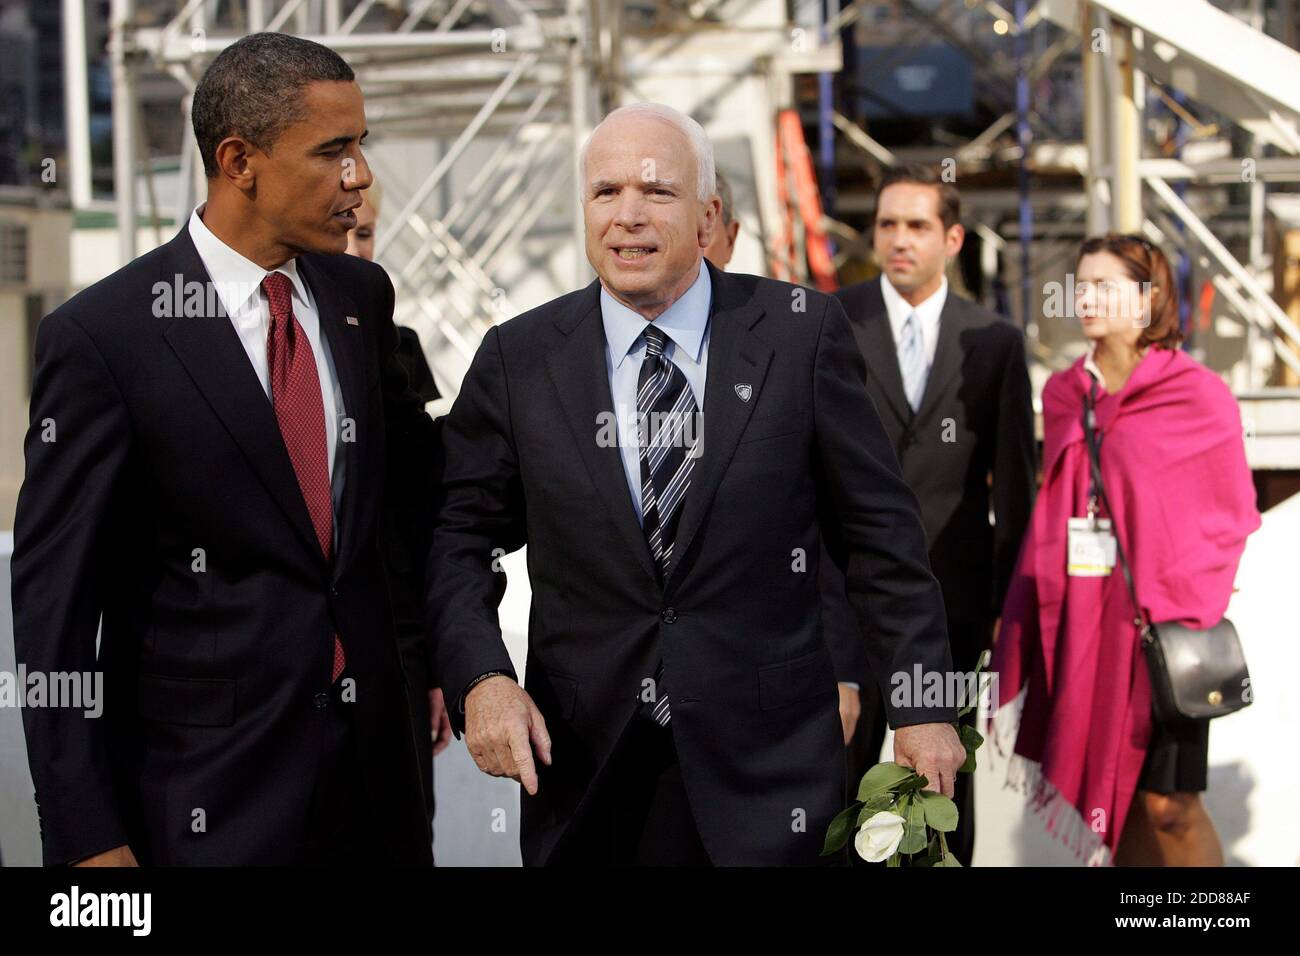 NO FILM, NO VIDEO, NO TV, NO DOCUMENTARY - Presidential candidates Sen. Barack Obama (D-Ill.) and Sen. John McCain (R-Ariz.) talk after visiting the reflecting pool at the World Trade Center during the seventh anniversary of the September 11, 2001 terrorist attacks in Manhattan, New York, Thursday, September 11, 2008. Photo by Bruce Gilbert/MCT/ABACAPRESS.COM Stock Photo